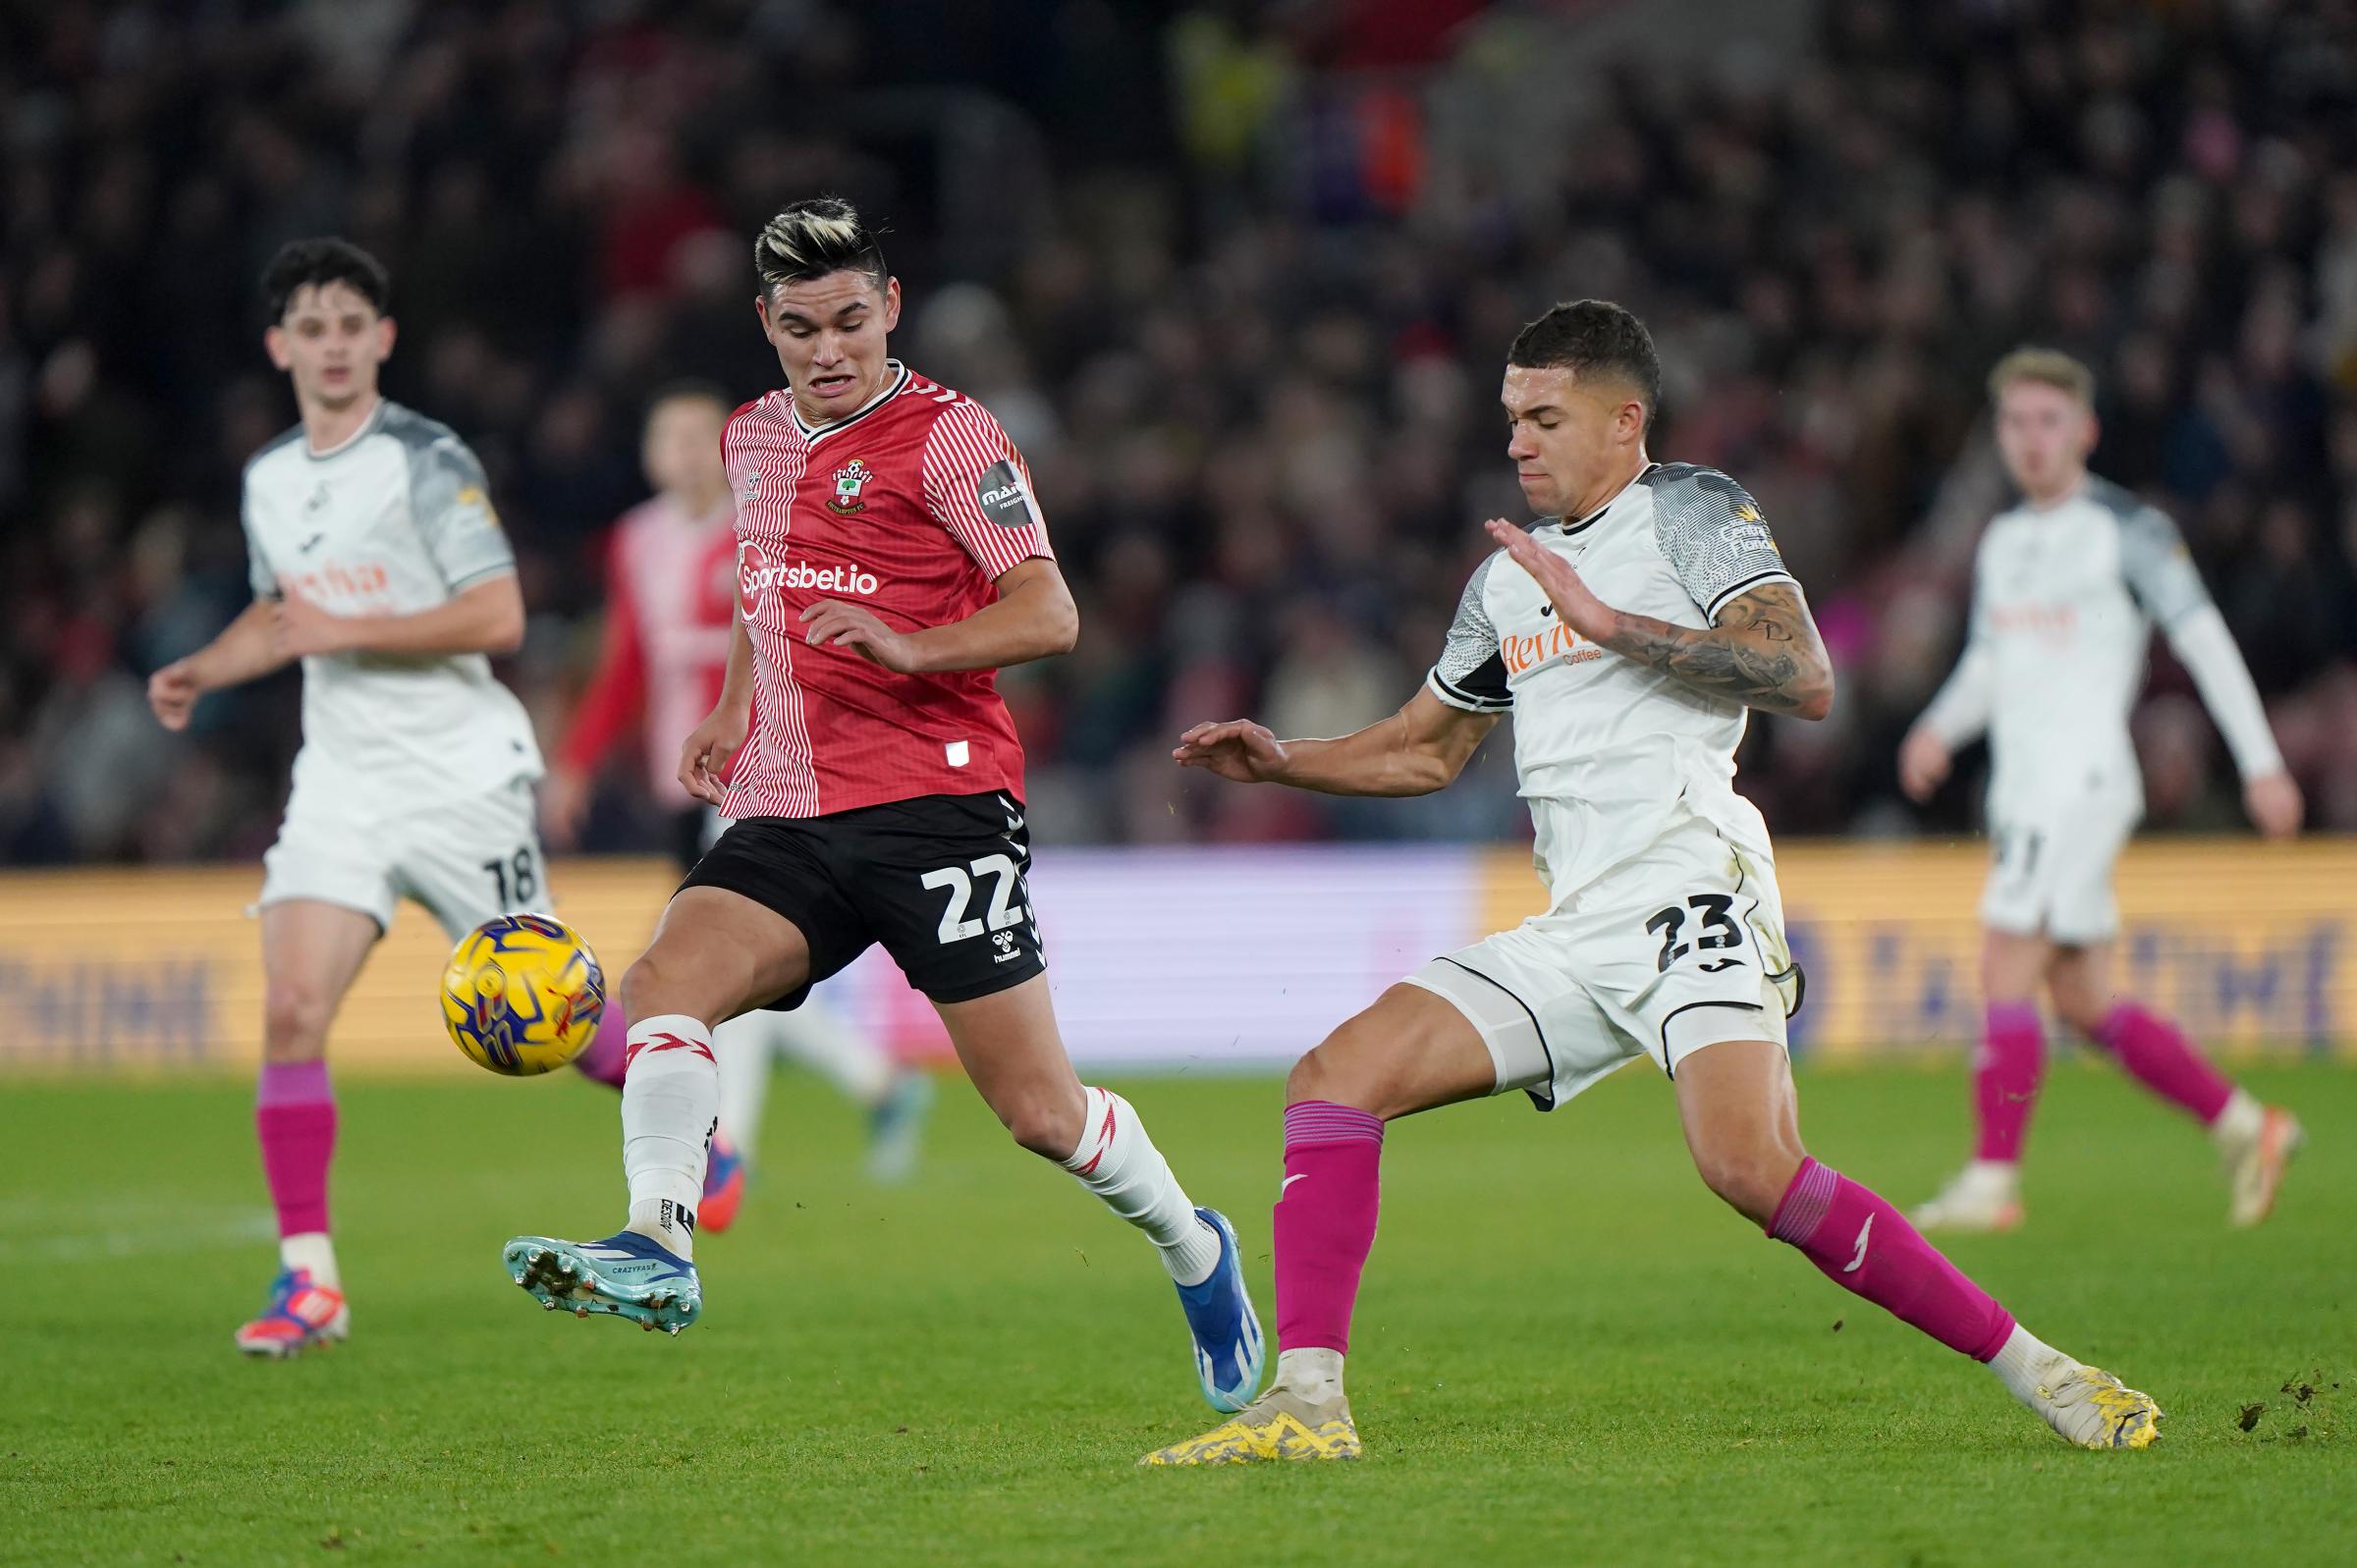 Southampton reportedly 'closing in' on move for Swansea defender Wood